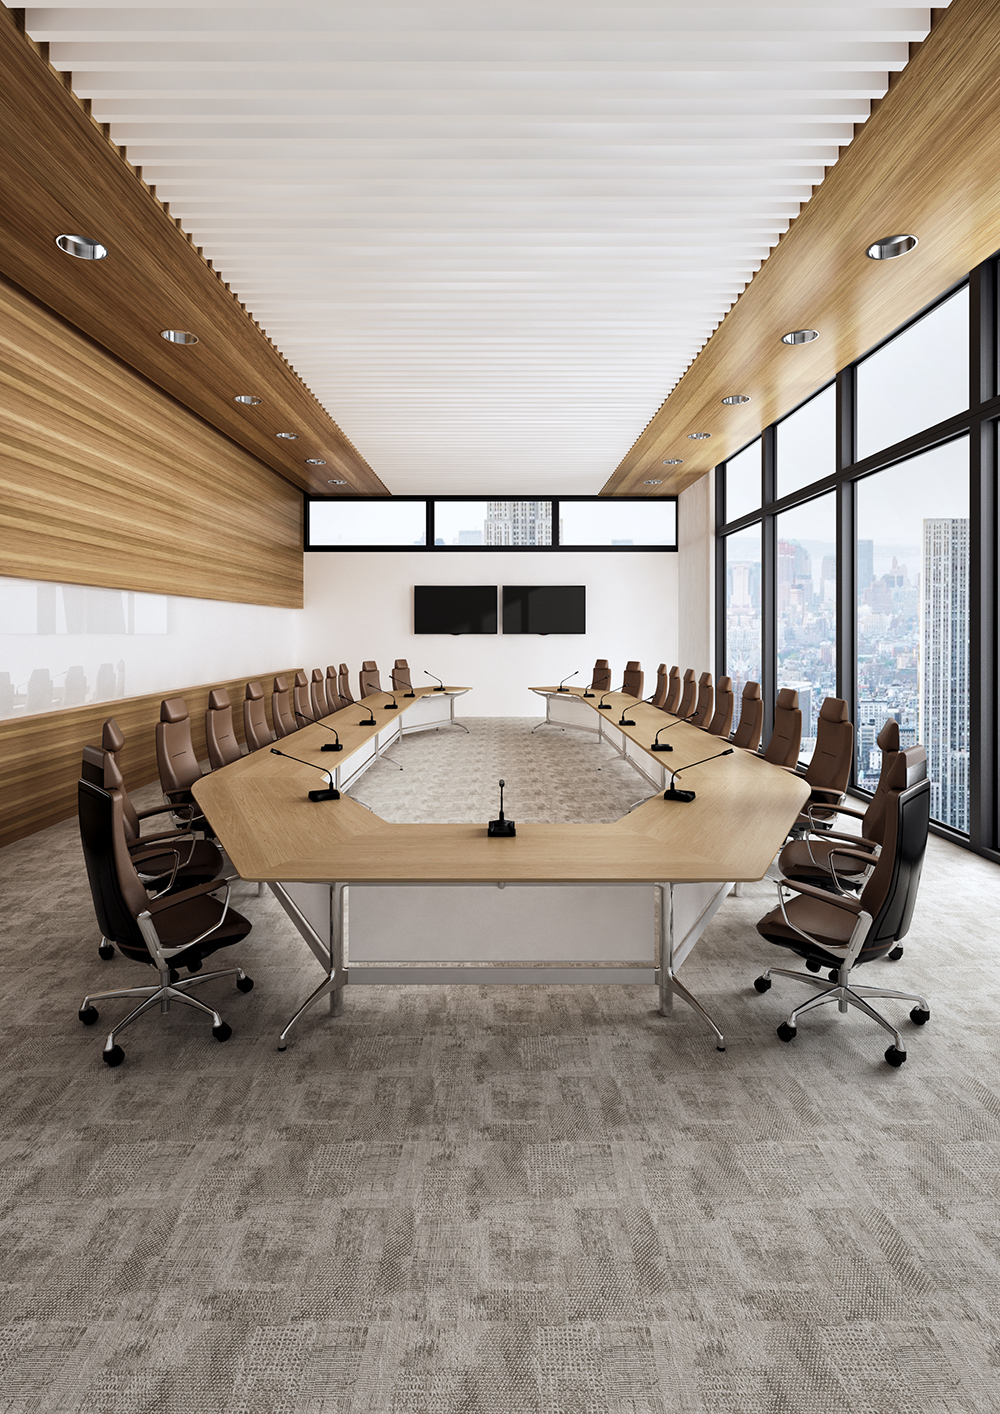 Fadz conference table with liven chairs in brown leather